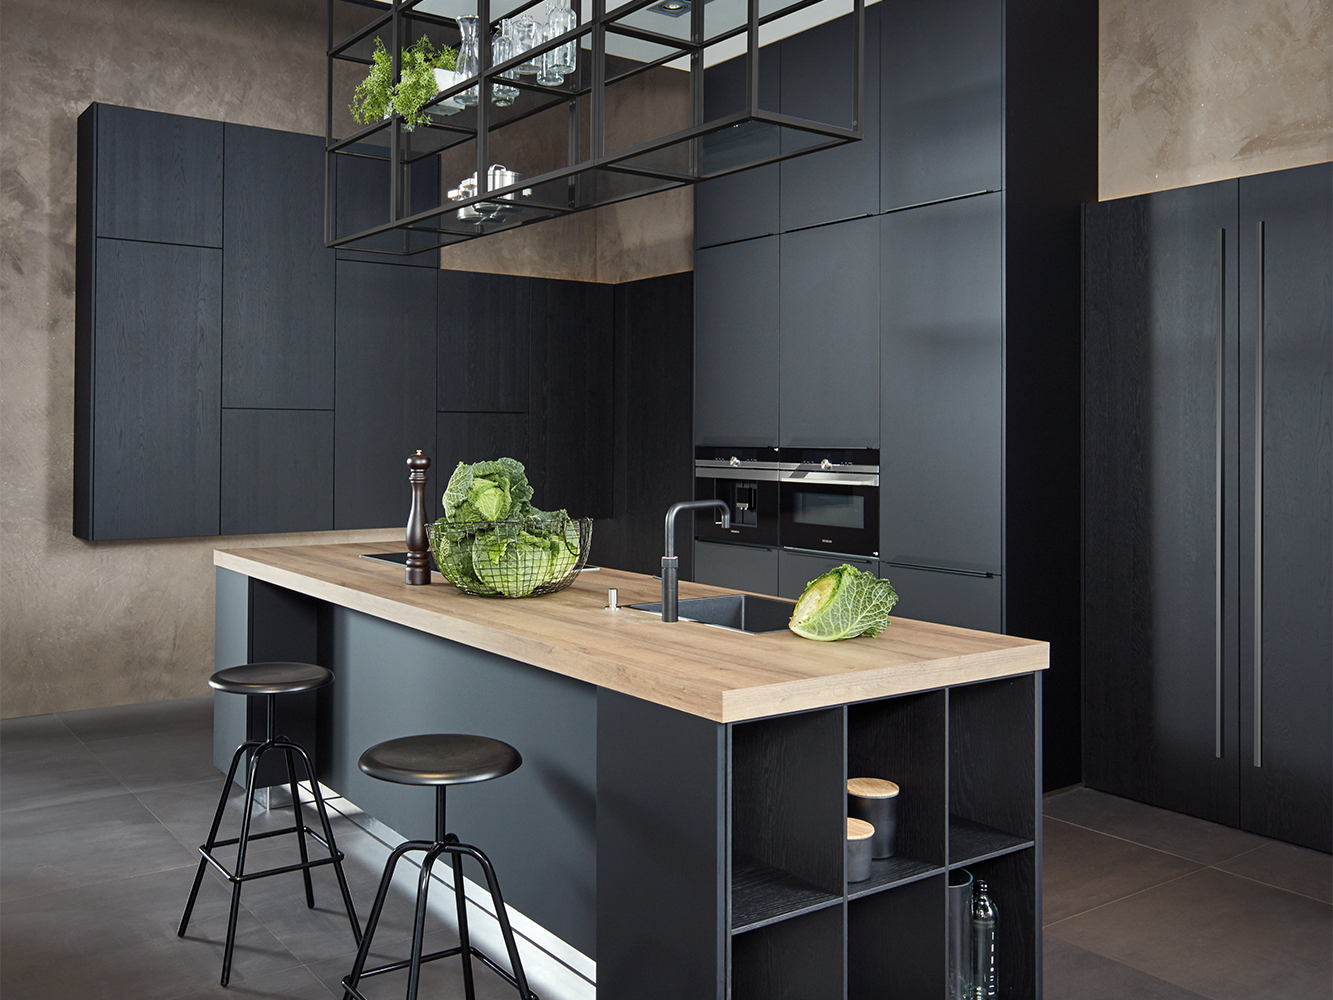 Kitchen colour trends Design ways to use black   Pronorm